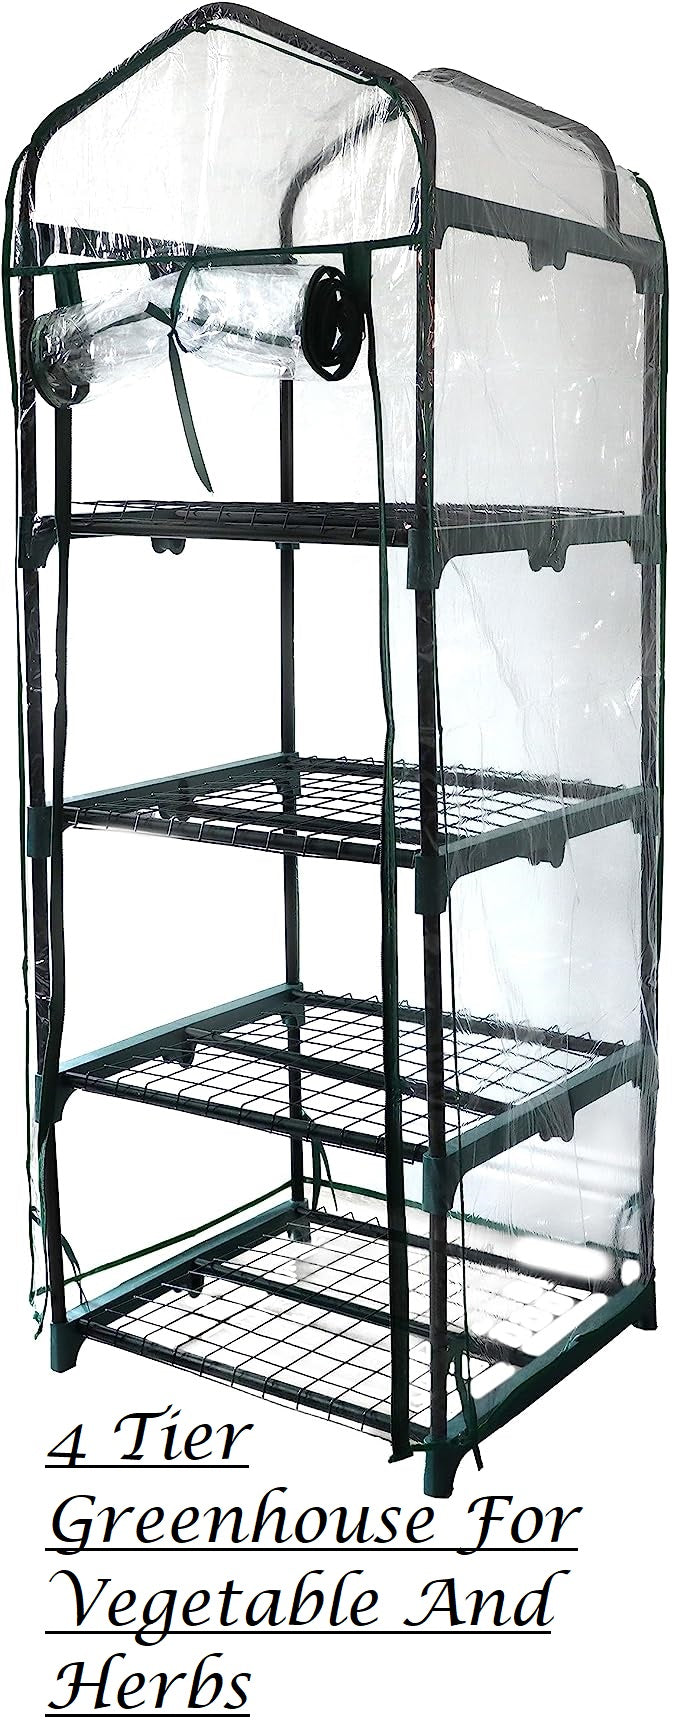 DIVCHI 4 Tier Greenhouse Durable Steel Frame Clear PVC Cover for Growing Plants